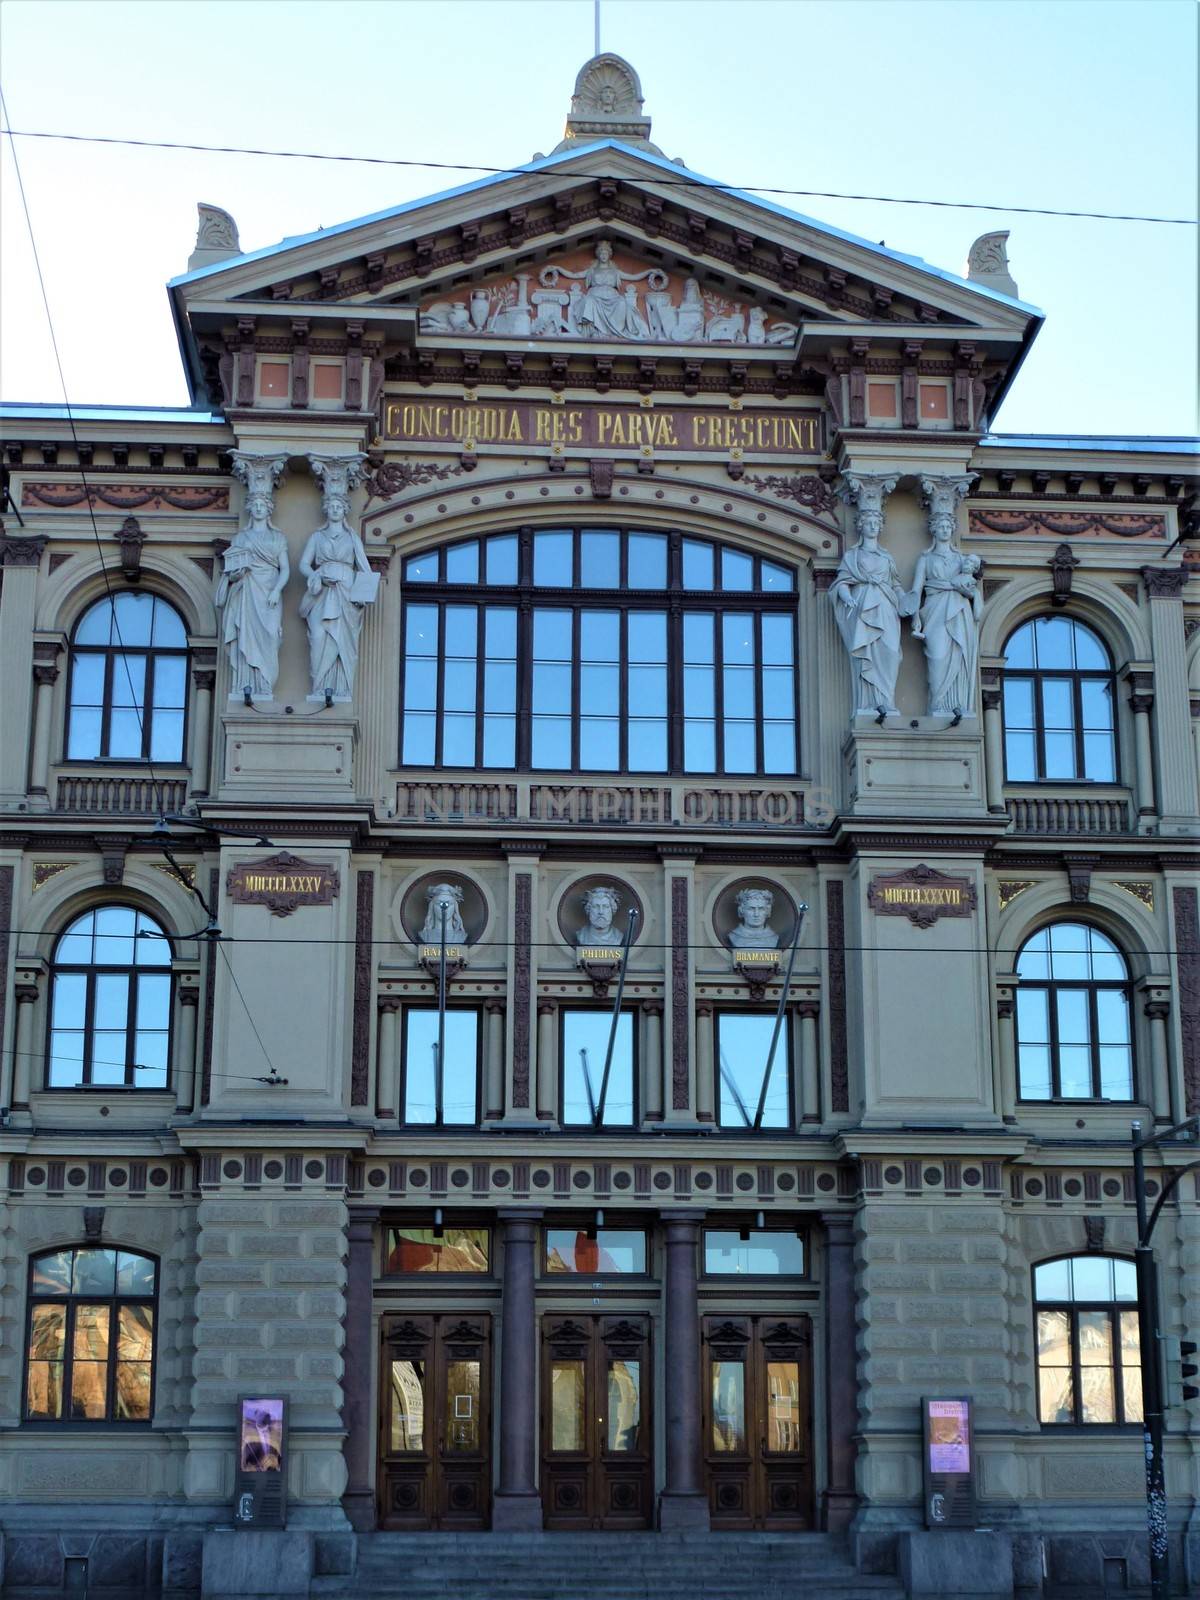 Entrance of the Ateneum art museum in Helsinki by pisces2386